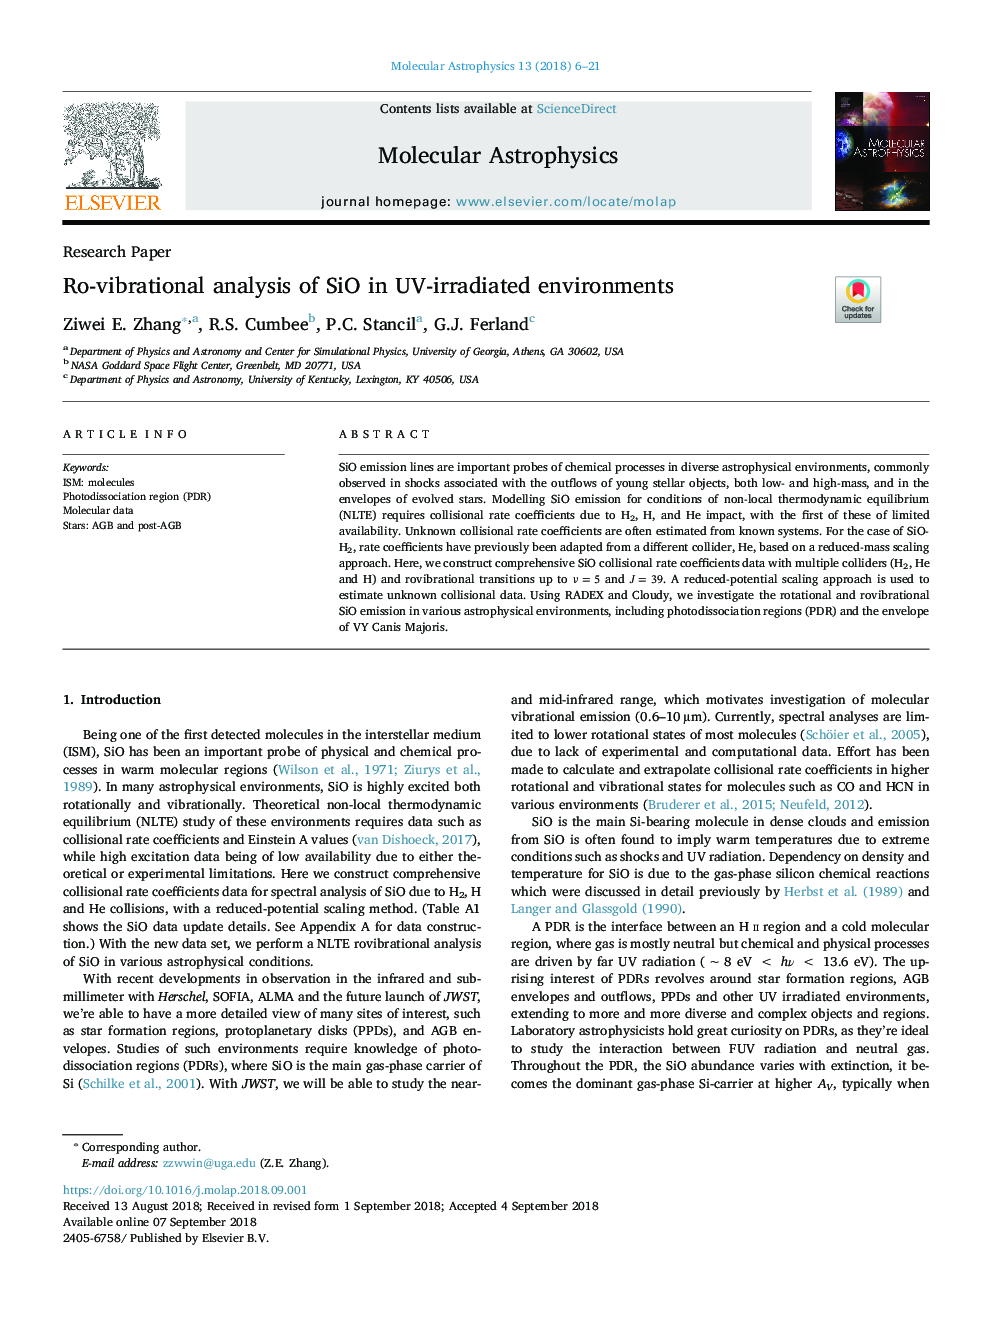 Ro-vibrational analysis of SiO in UV-irradiated environments